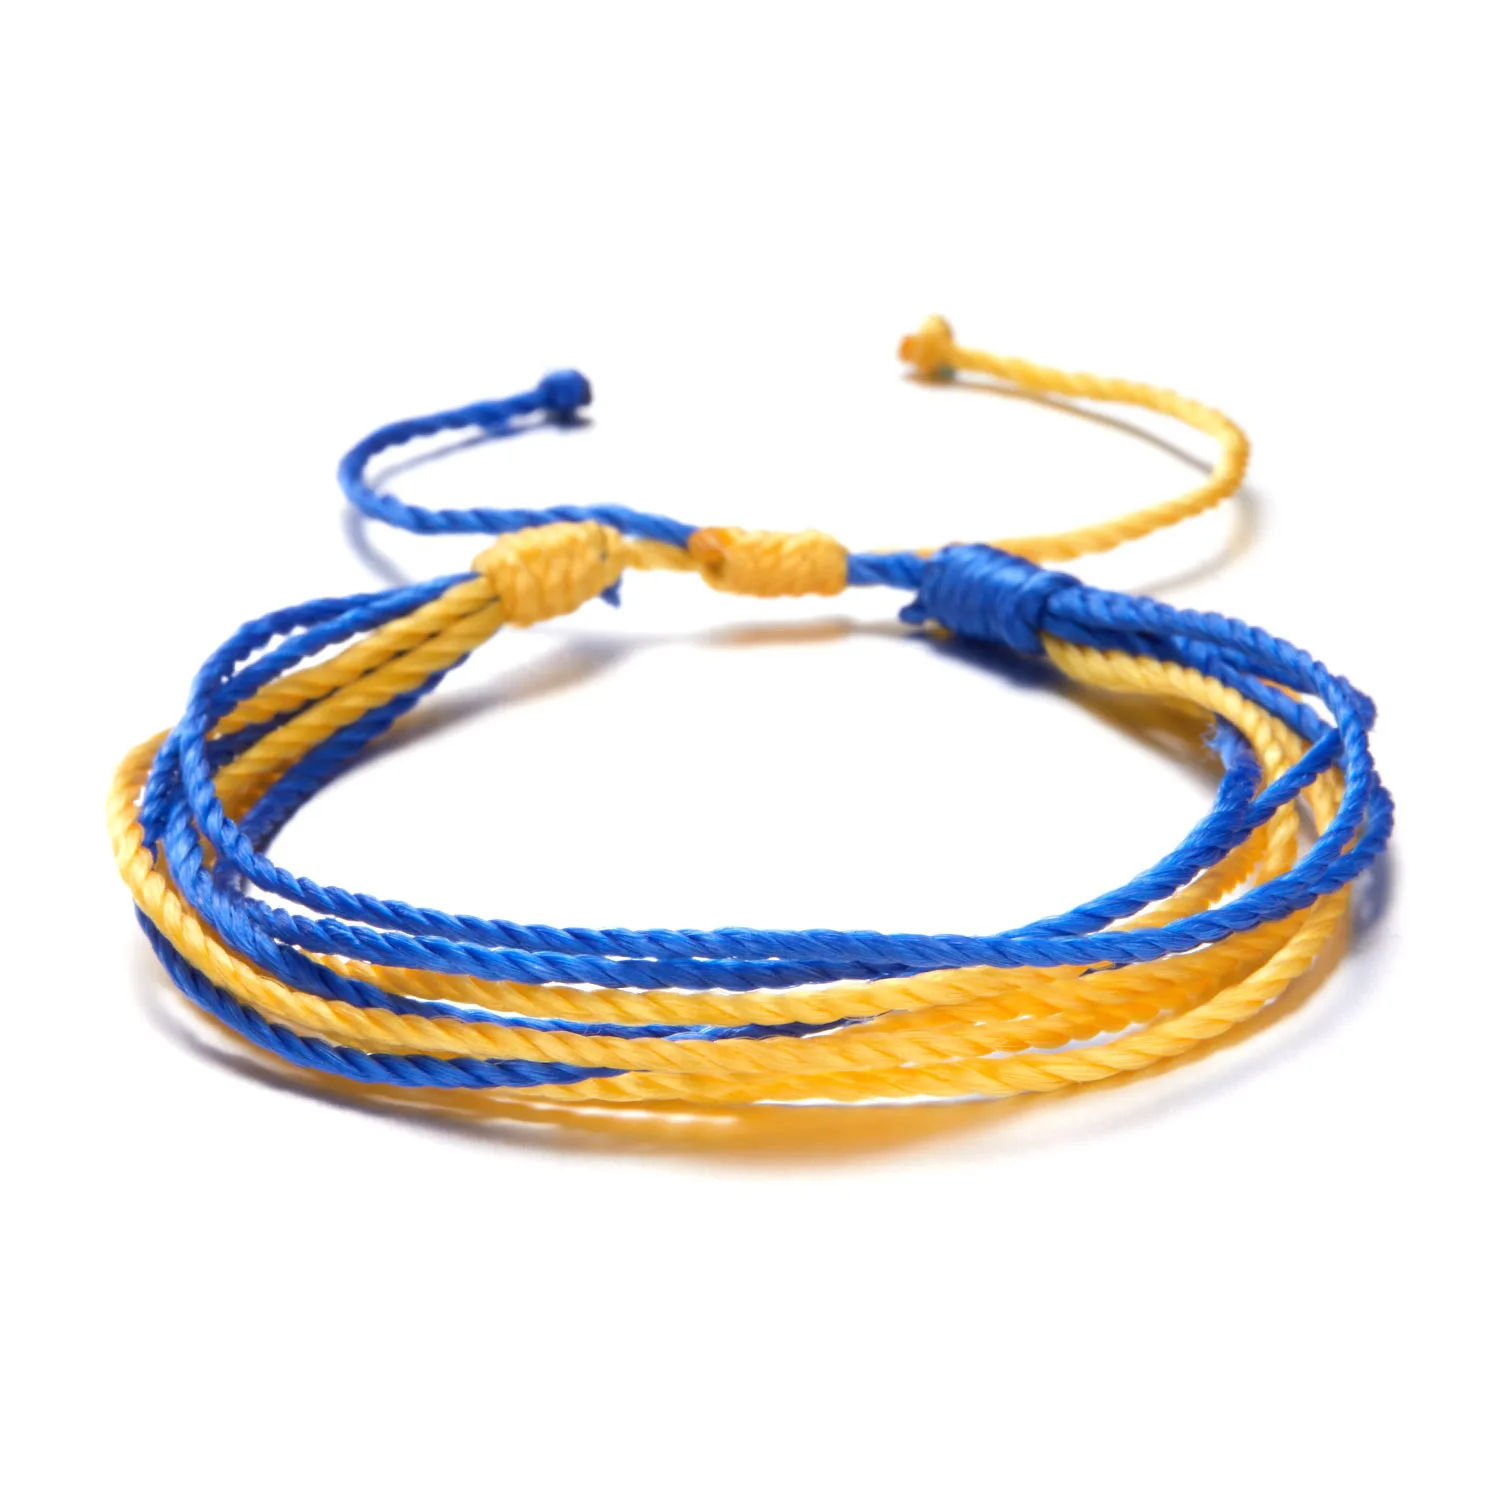 cheap bras Fashion Ukraine National Flag Color Rope Bracelet For Women Men Handmade Woven String Friends Jewelry Daisy Couple Gift Bangle half camisole Tanks & Camis